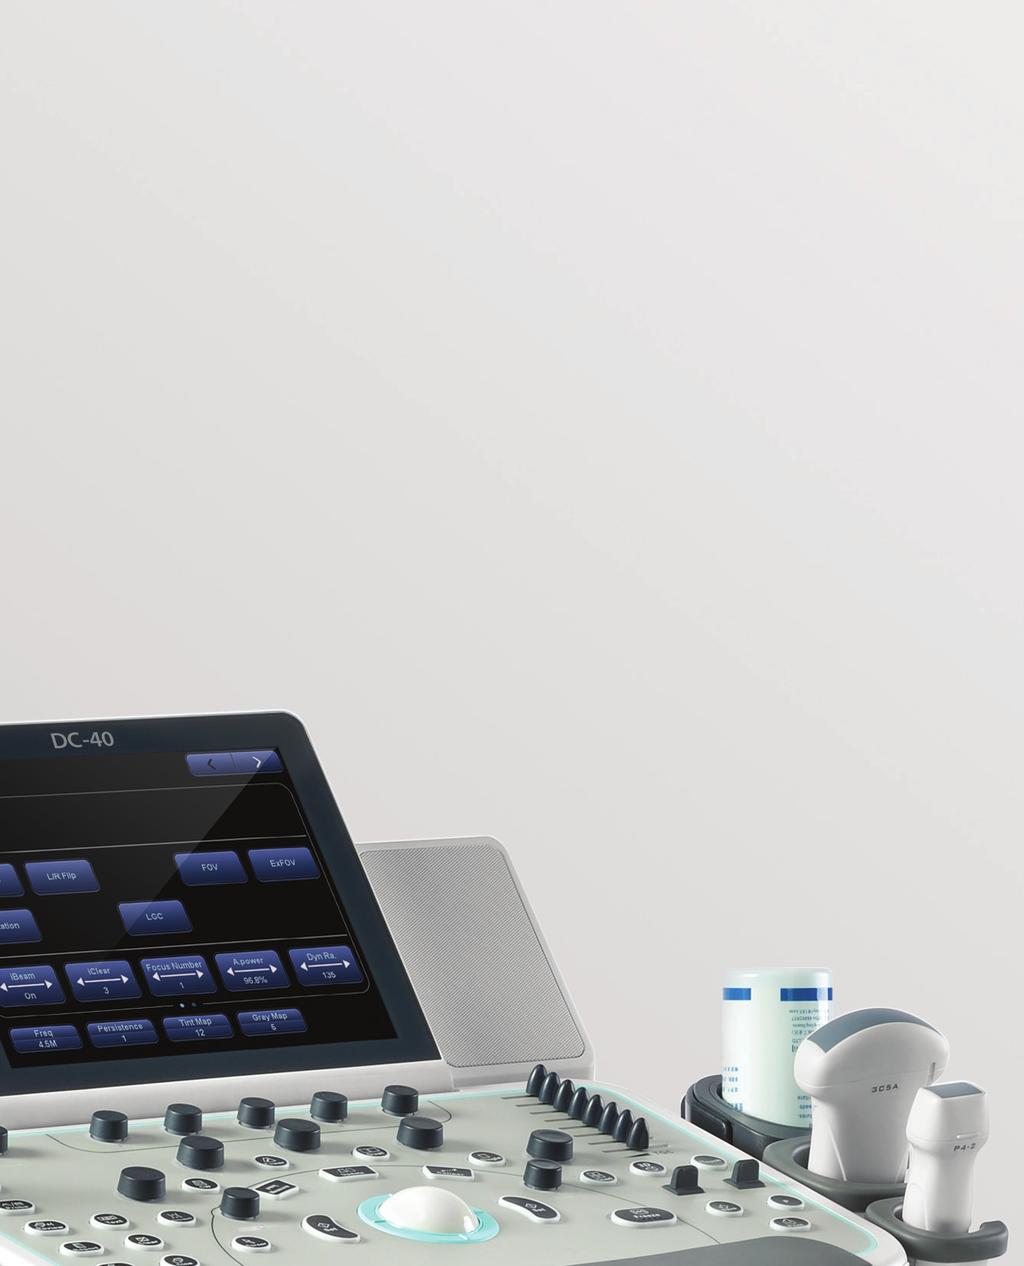 To deliver on the promise of quality healthcare within reach, Mindray s DC-40, the next generation of shared service ultrasound systems, incorporates innovative high performance technology in an